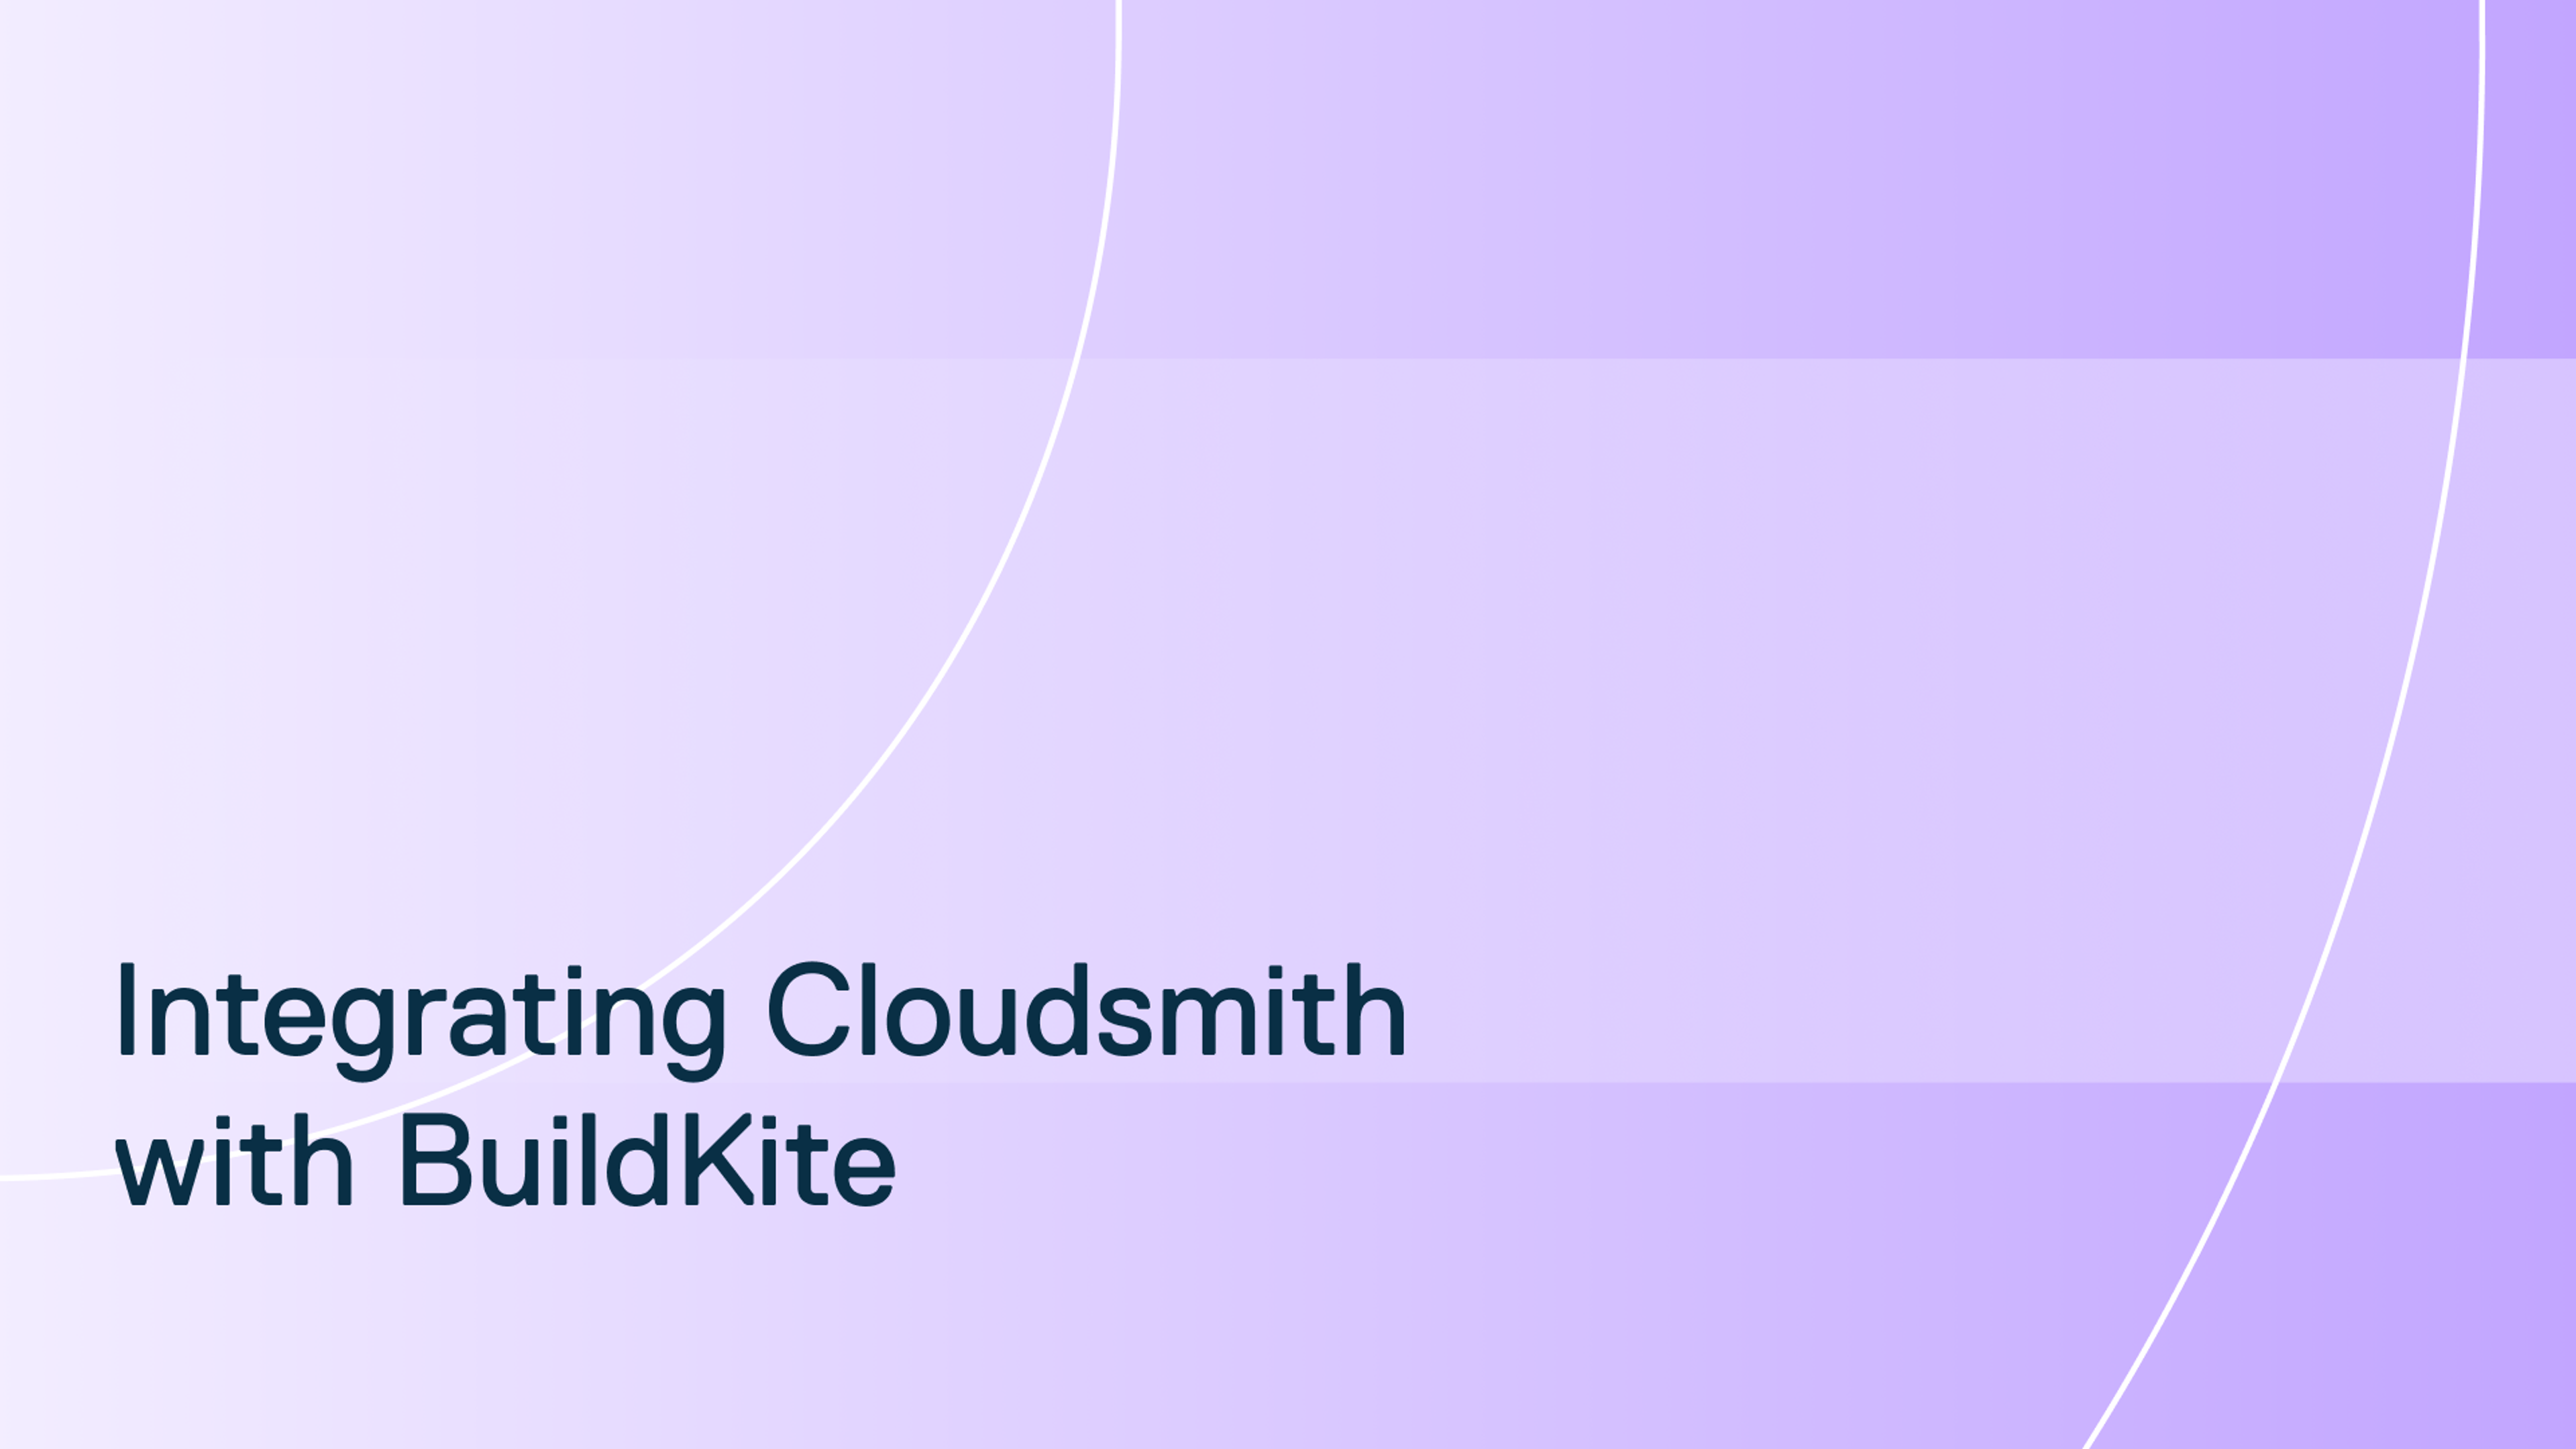 Using Buildkite to push packages to Cloudsmith